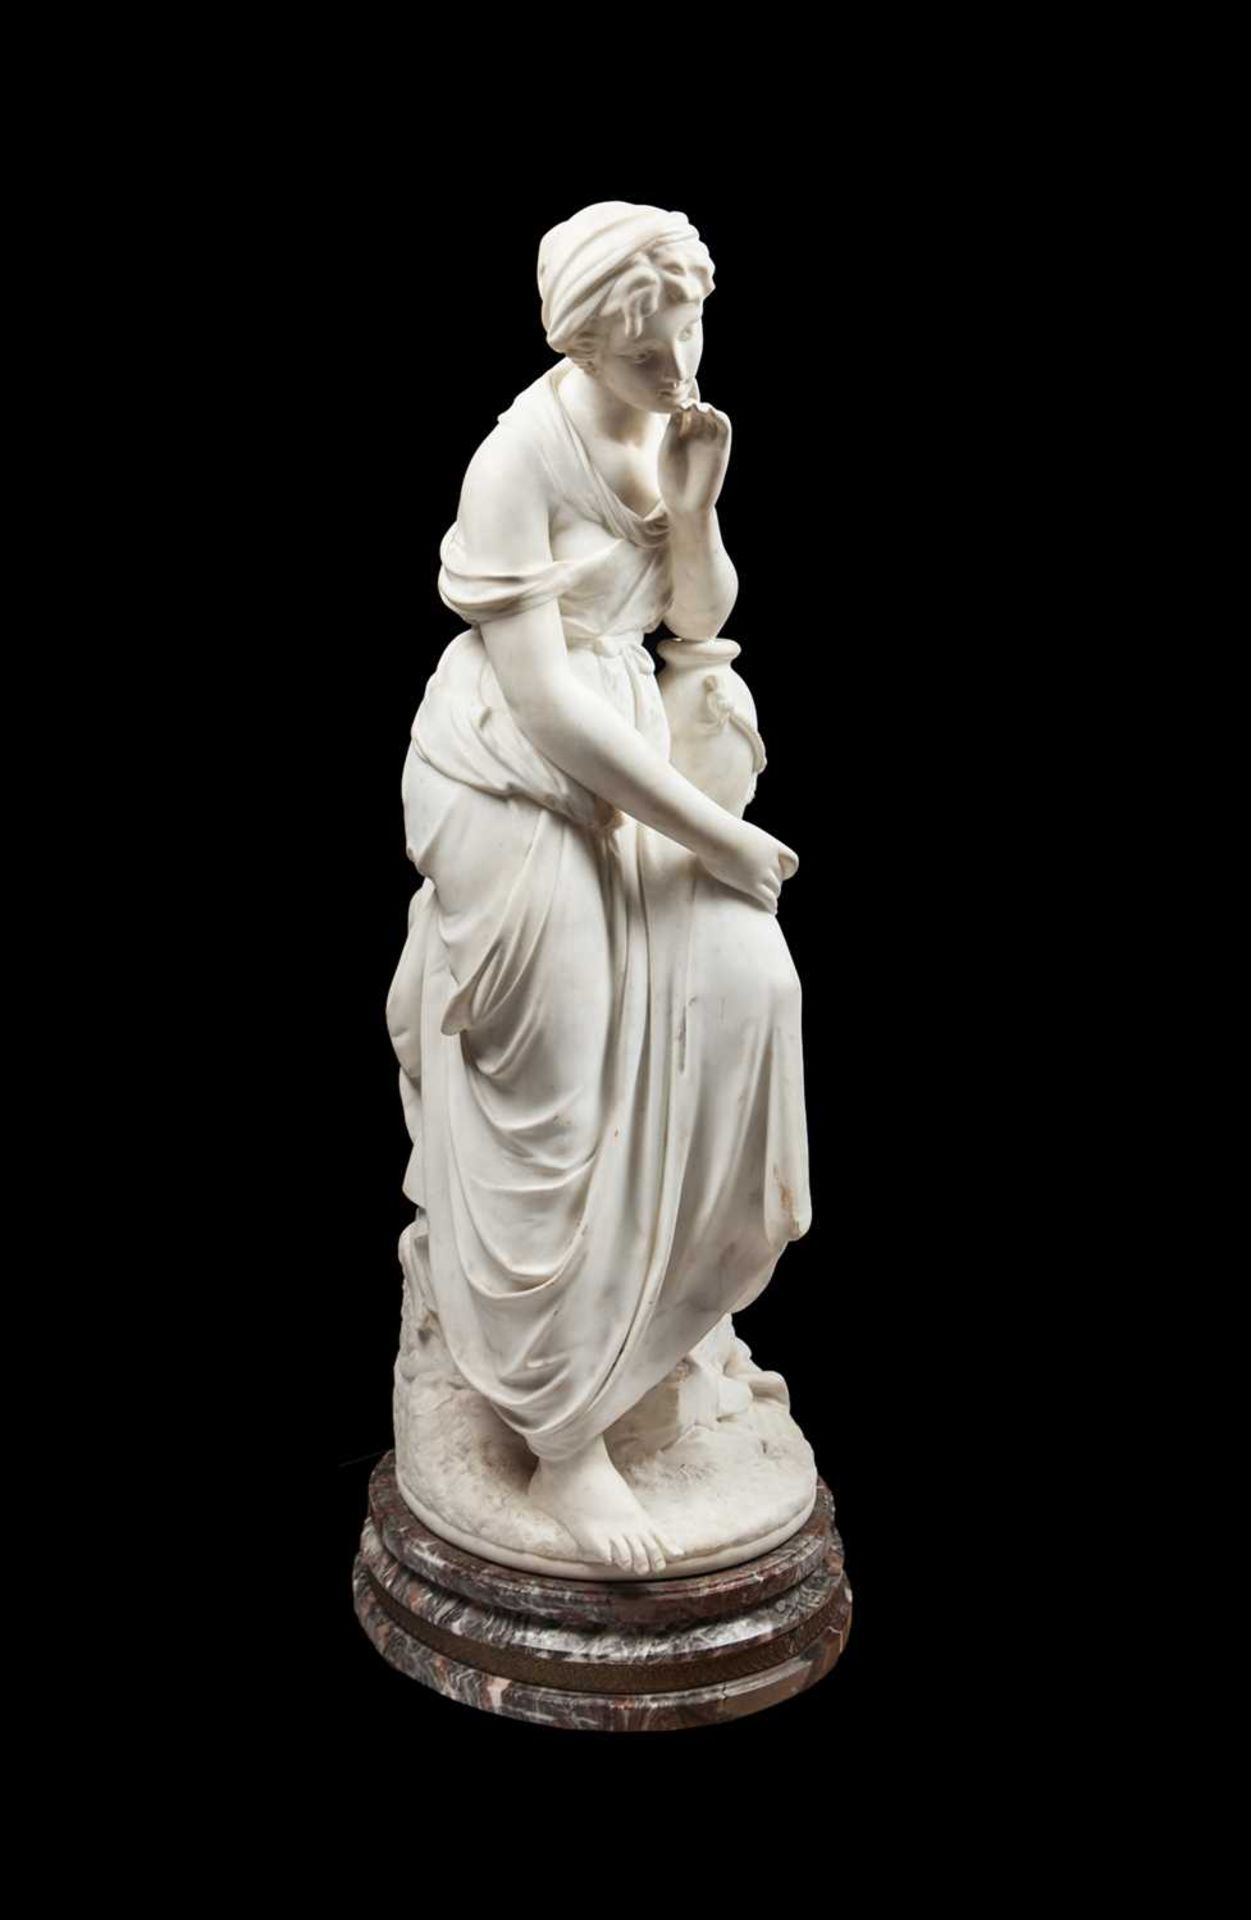 A LARGE LATE 19TH CENTURY ITALIAN MARBLE FIGURE OF RUTH AT THE WELL - Image 3 of 3